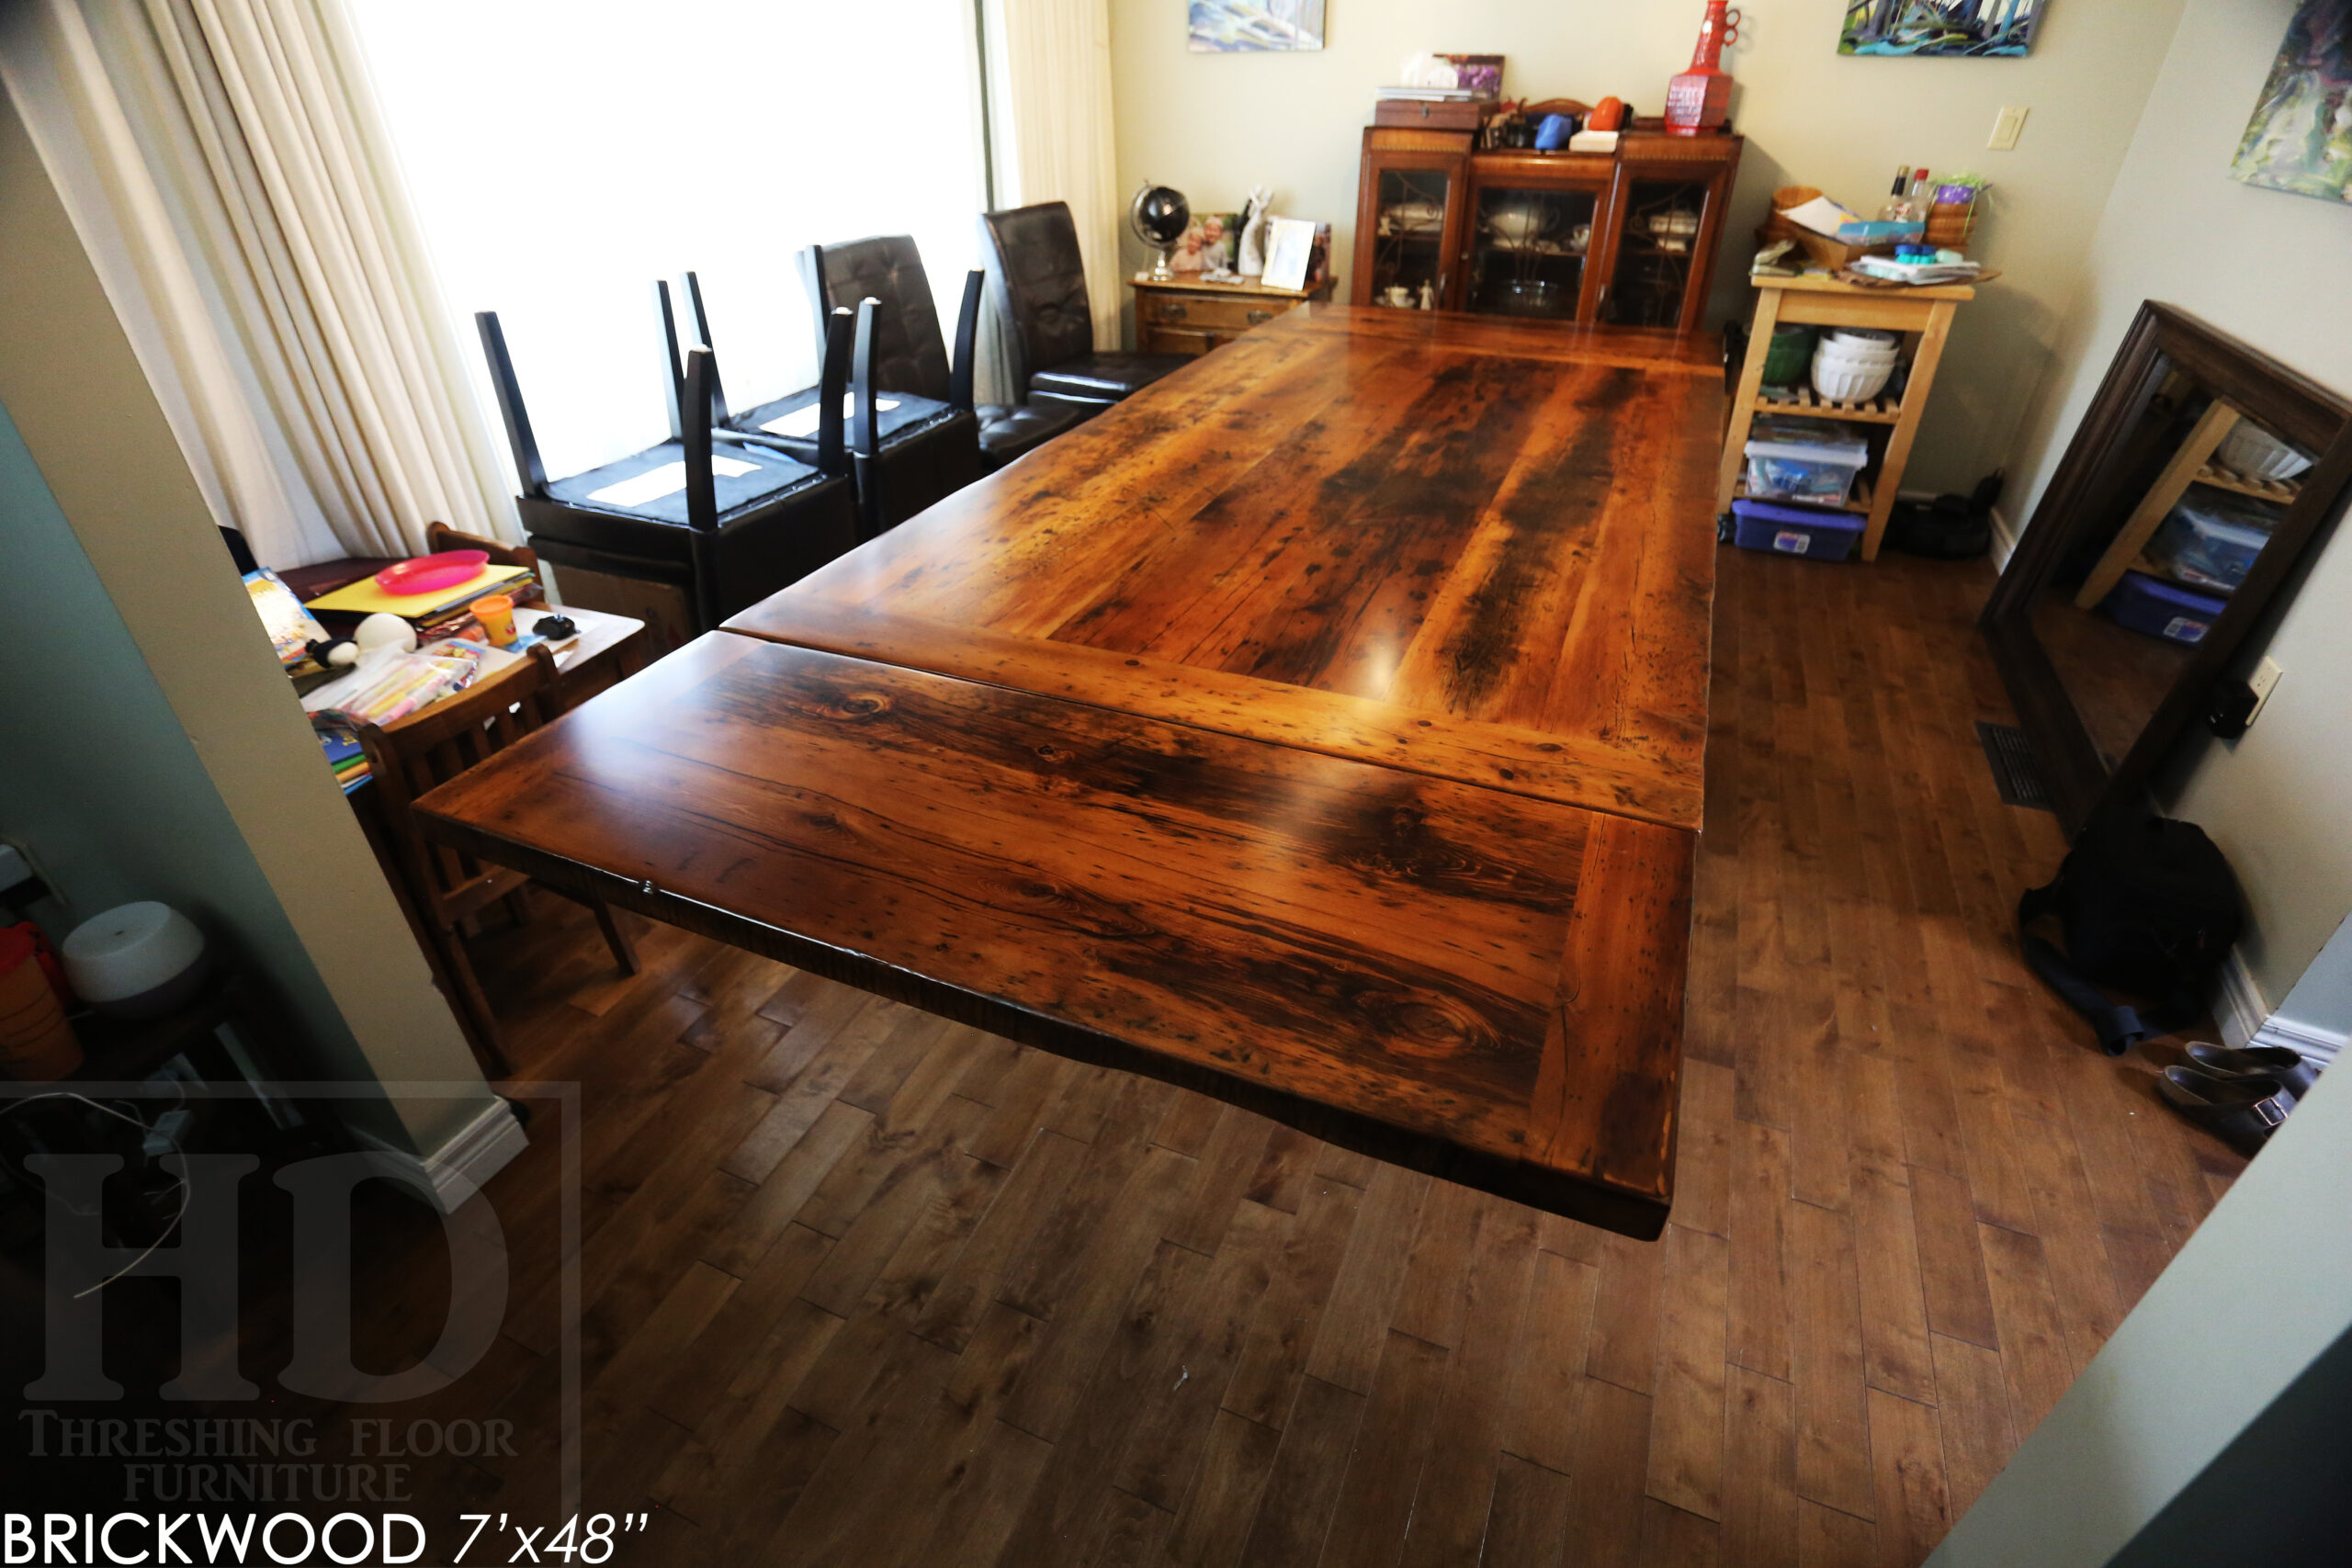 7' Ontario barnwood trestle table we made for an Ingersoll, ON company - 48" wide - 2" Hemlock Threshing Floor Construction - Original edges & distressing maintained - Premium epoxy + satin polyurethane finish - Two 18" leaf extensions [making total length 10' when extended] - www.table.ca